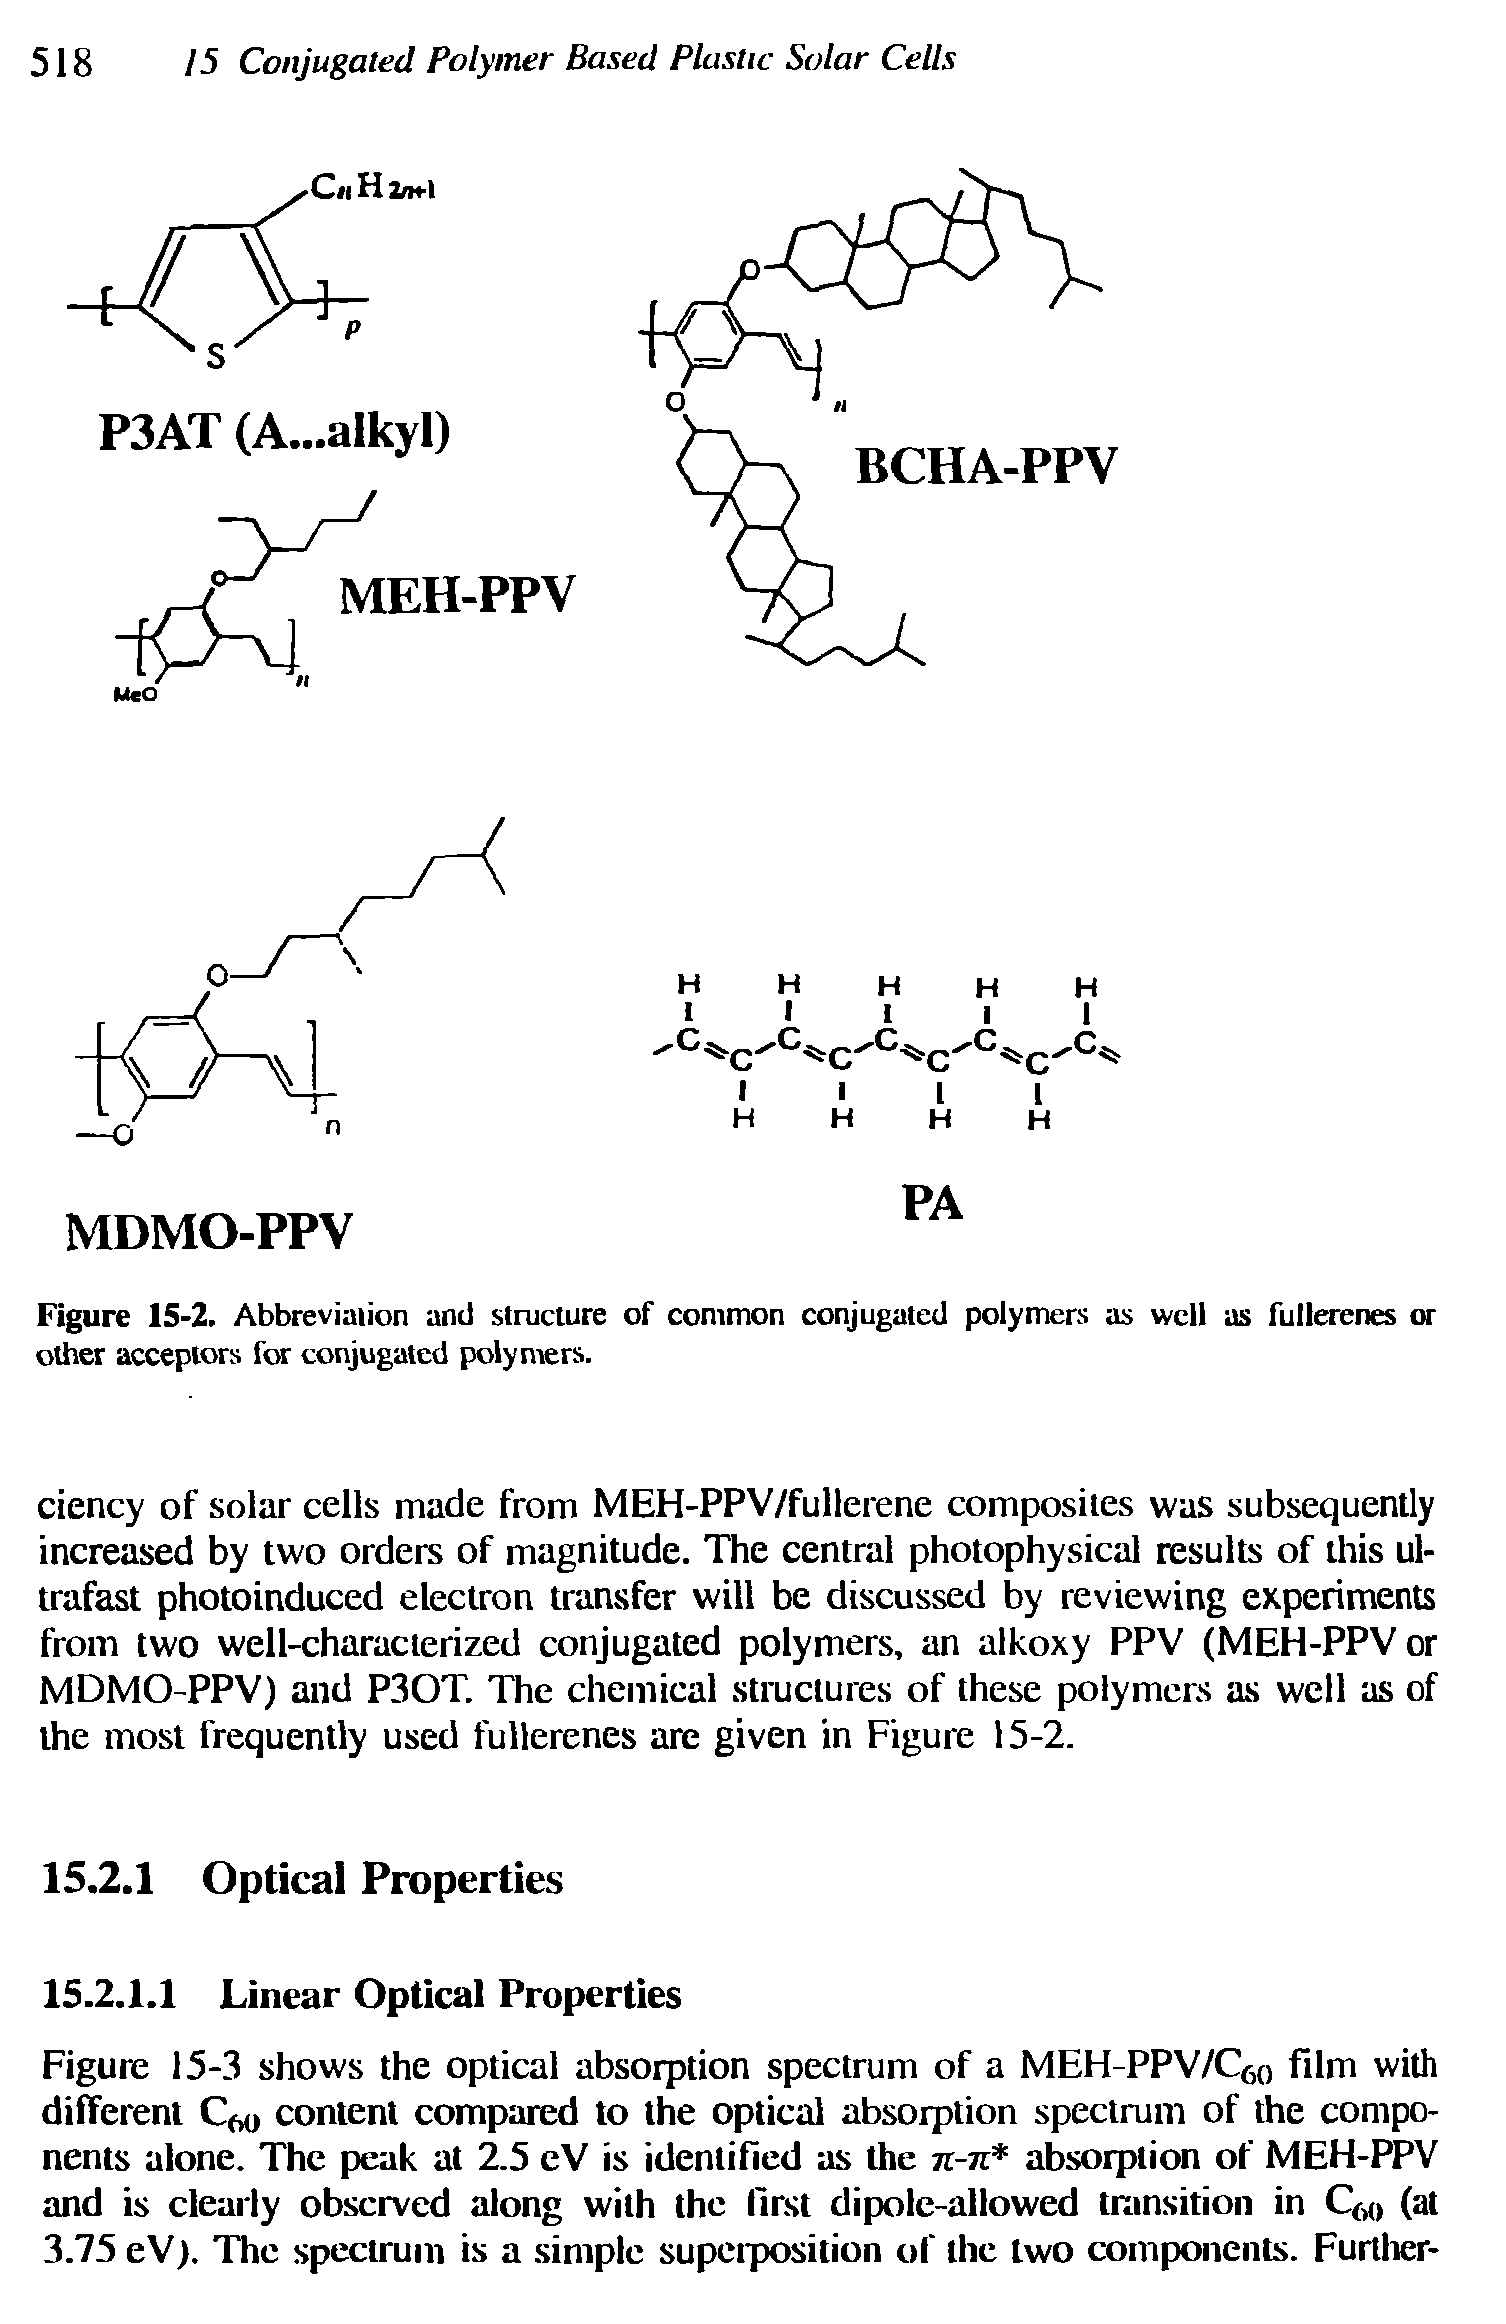 Figure 15-2. Abbreviation and structure of common conjugated polymers as well as fullerenes or other acceptors for conjugated polymers.